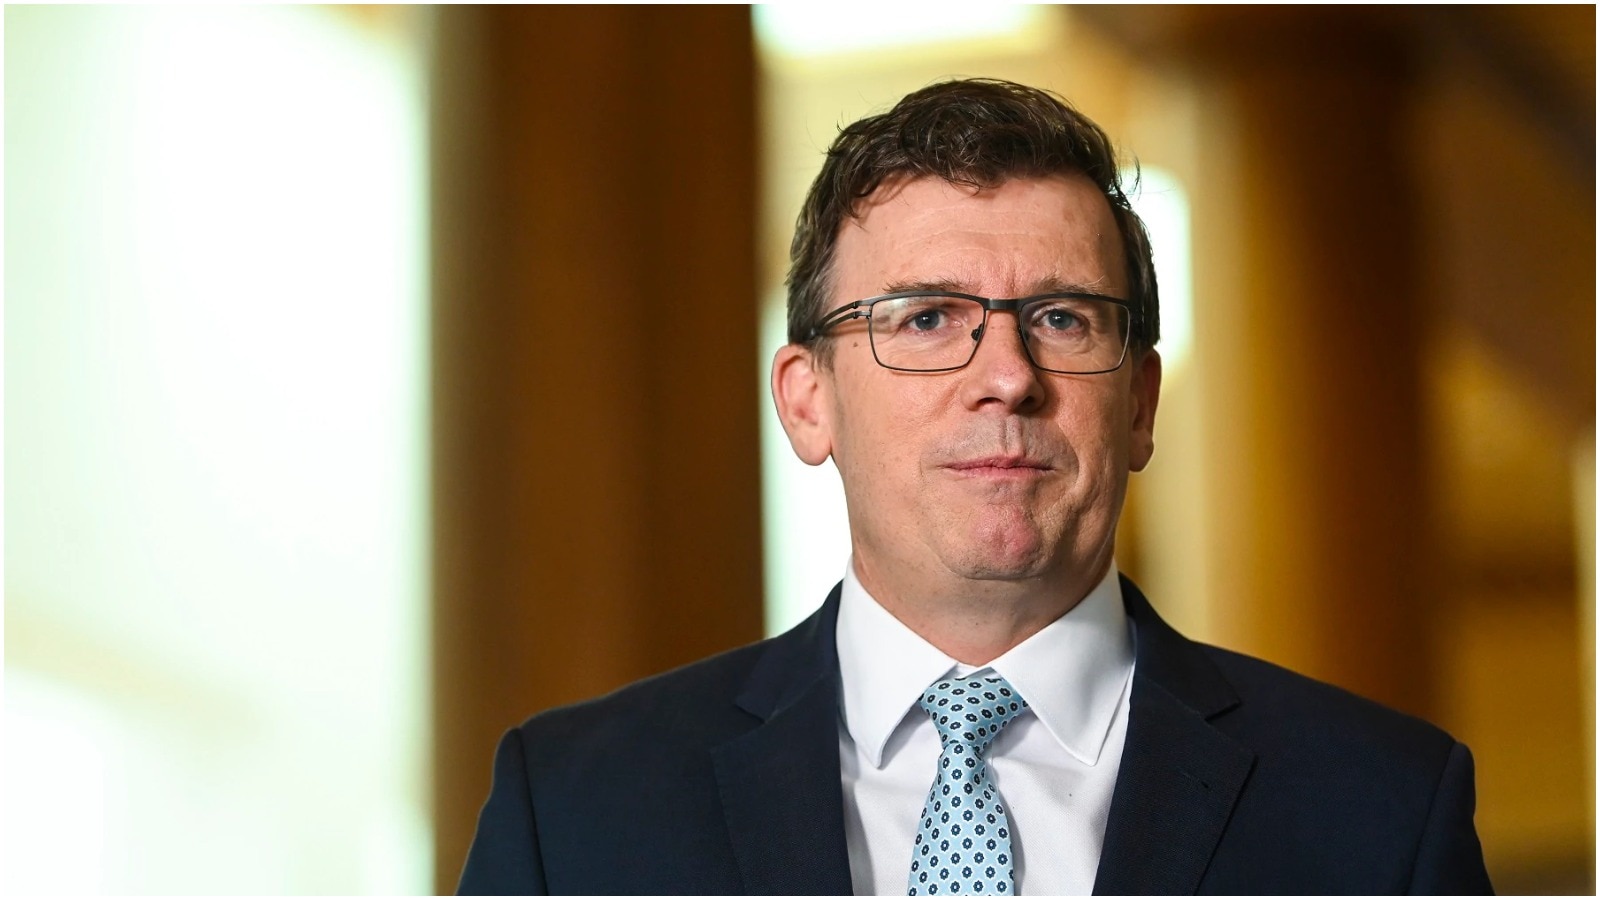 Alan Tudge at Parliament House in Canberra